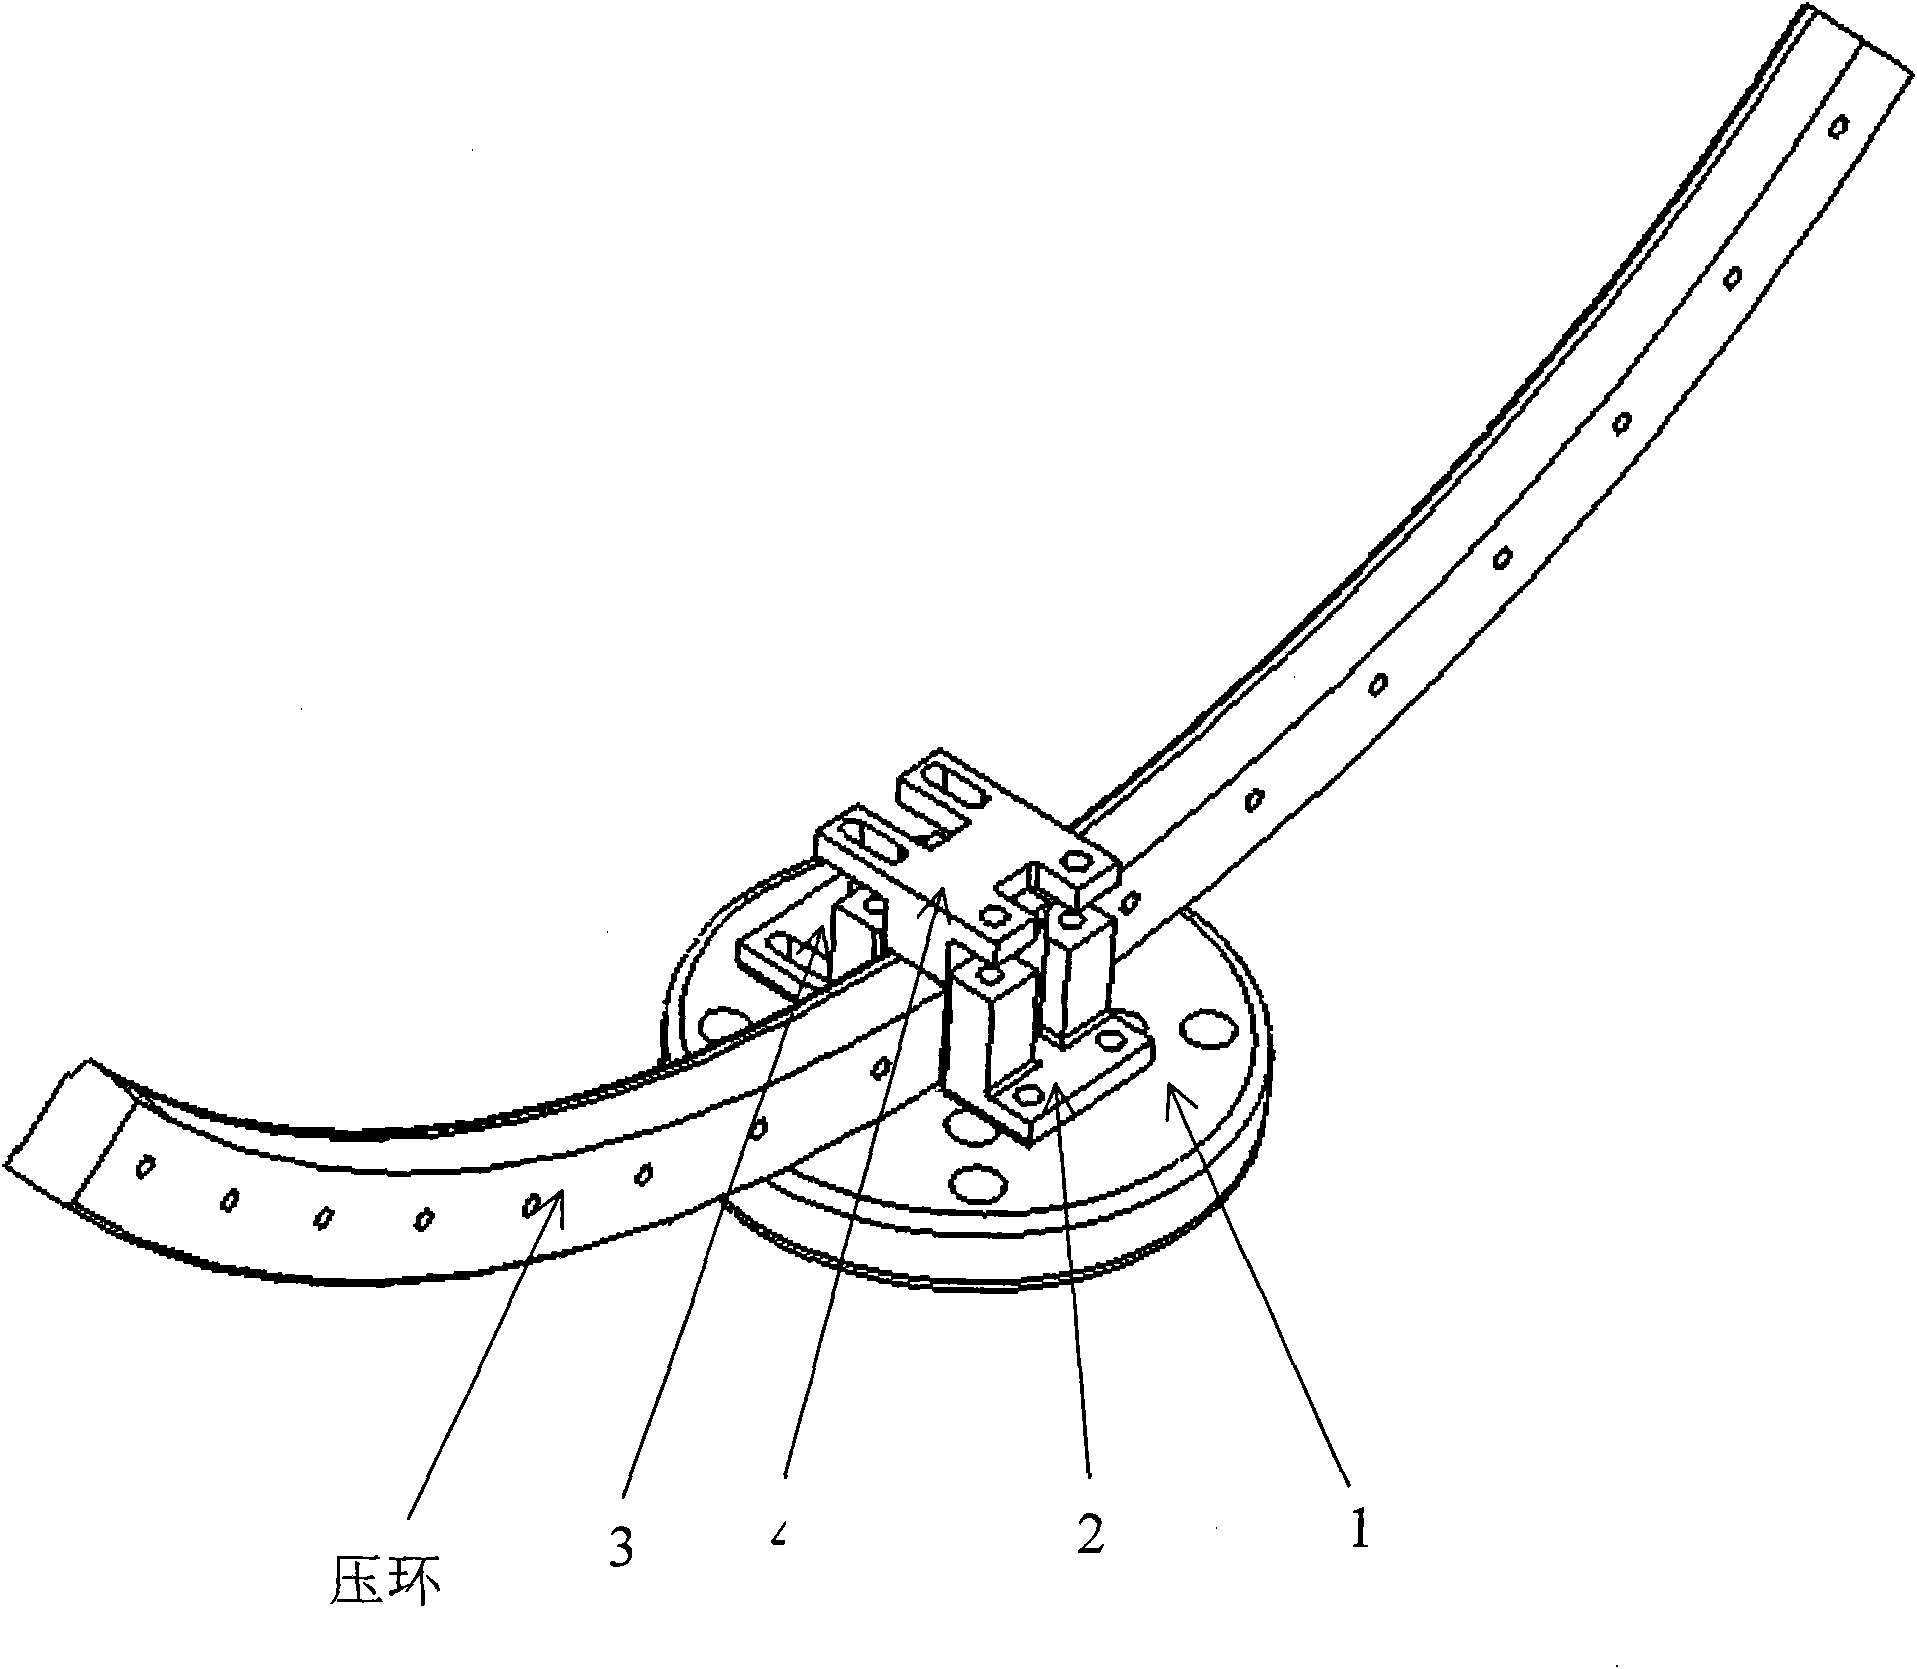 Clamping device in vibration distressing of satellite mechanical experiment pressure ring